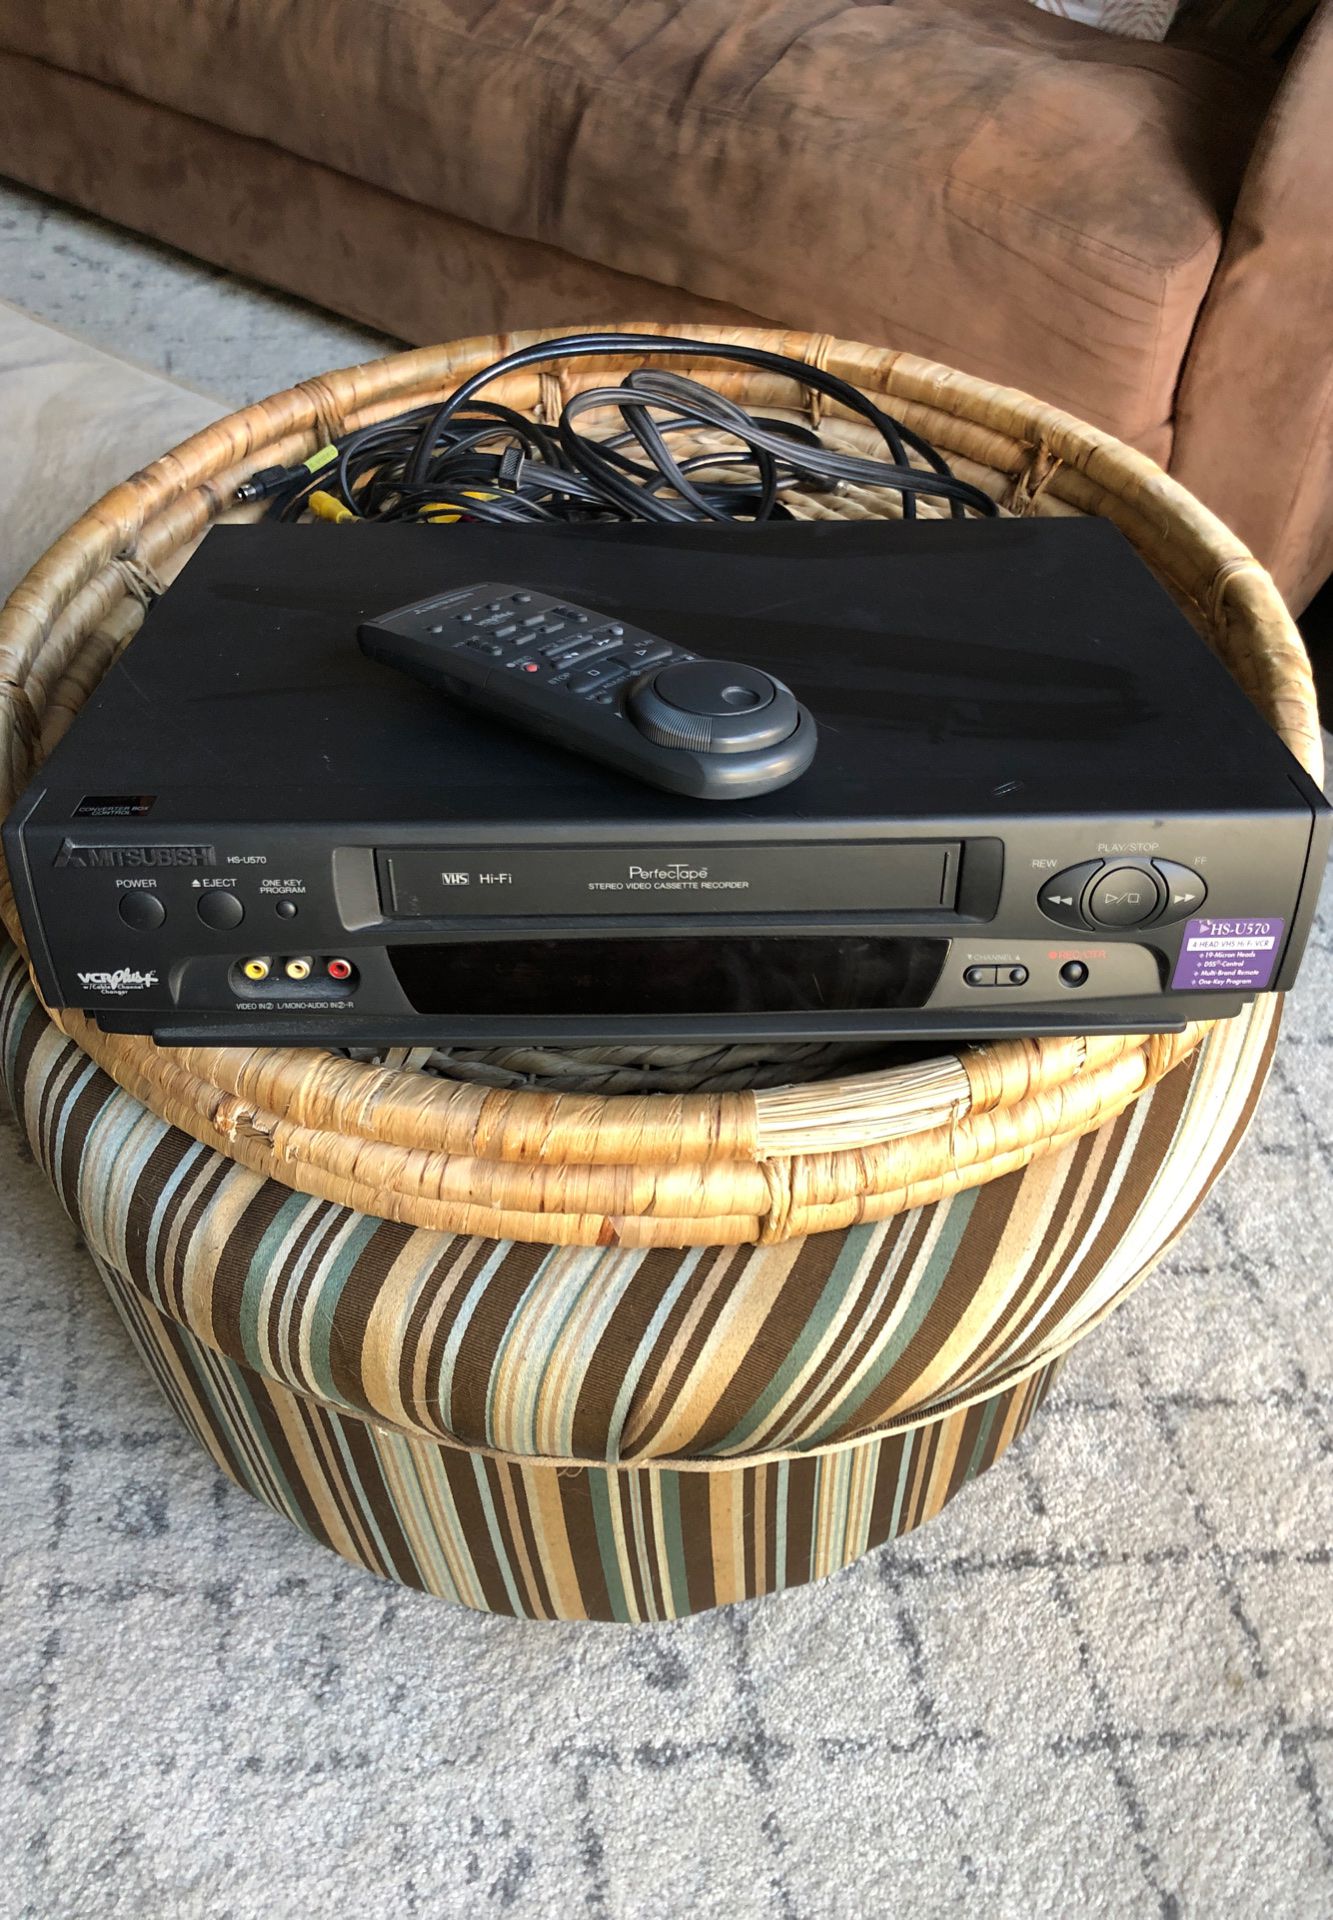 VCR Mitsubishi. Works great. WITH REMOTE and all cables